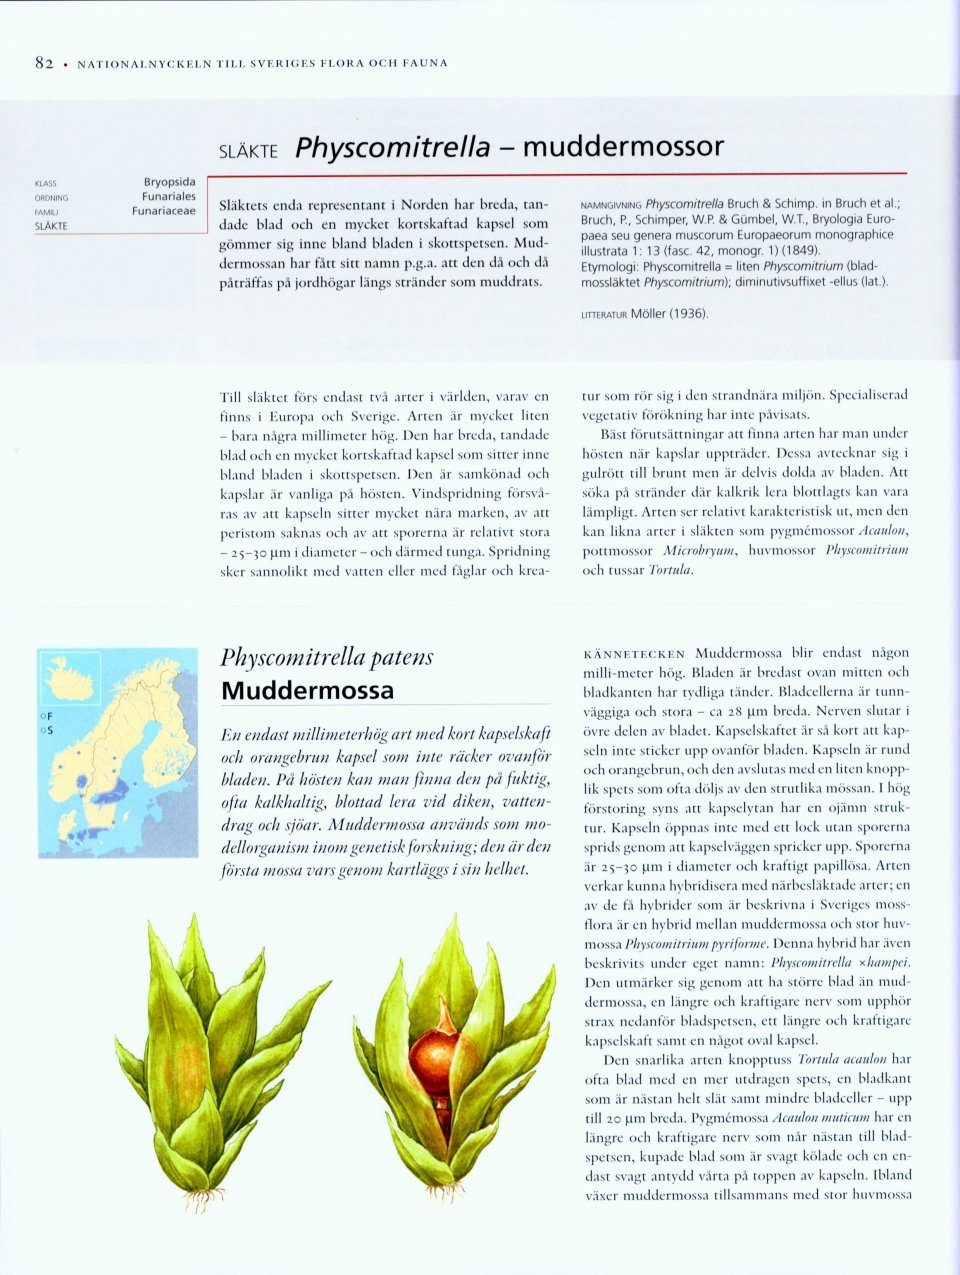 The Encyclopedia of the Swedish Flora and Fauna, Bladmossor 